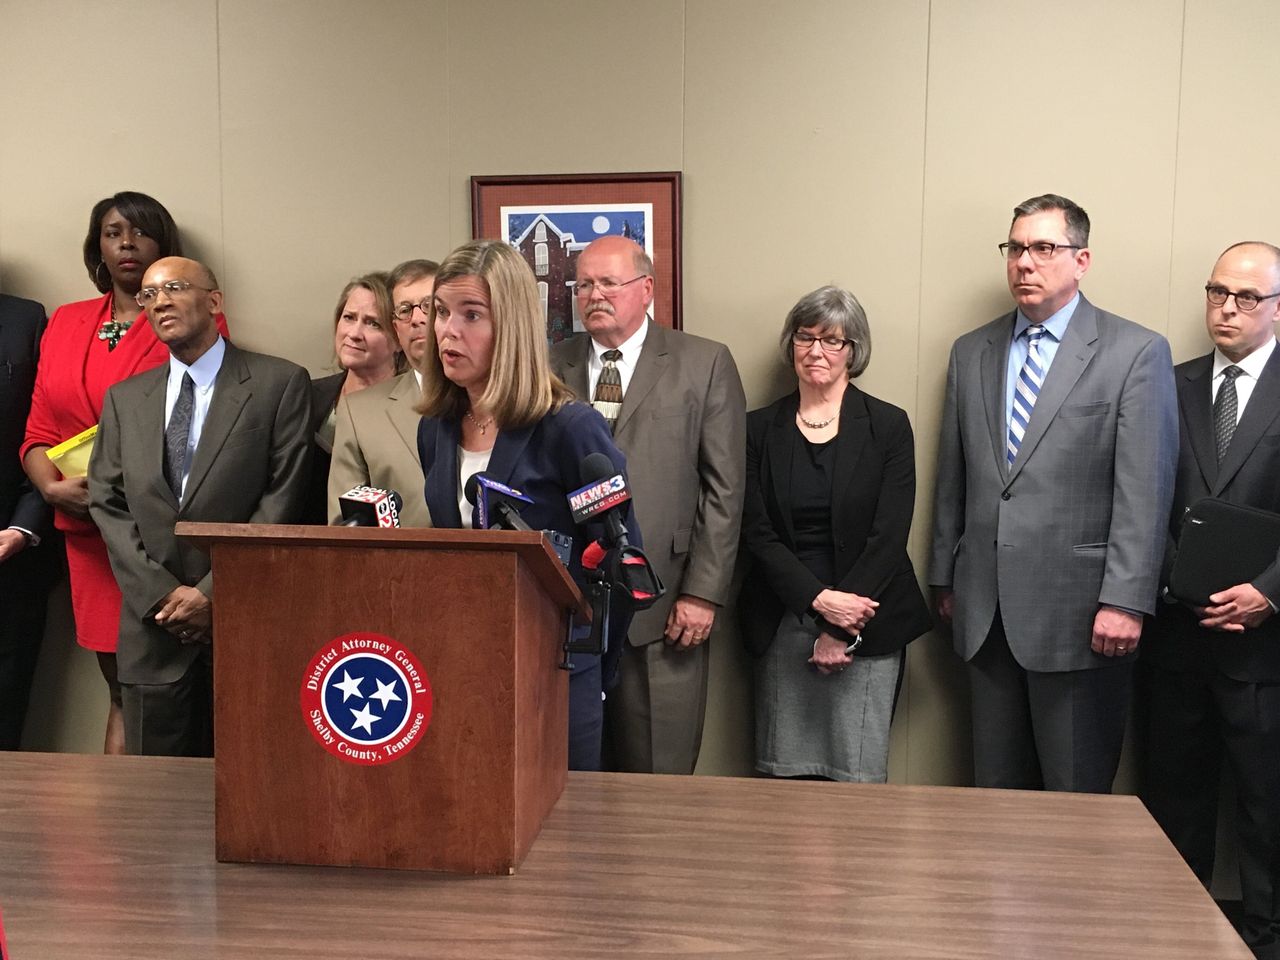 Weirich discusses the dismissal of disciplinary charges against her during a news conference on Monday, March 20, 2017 in Memphis, Tenn.